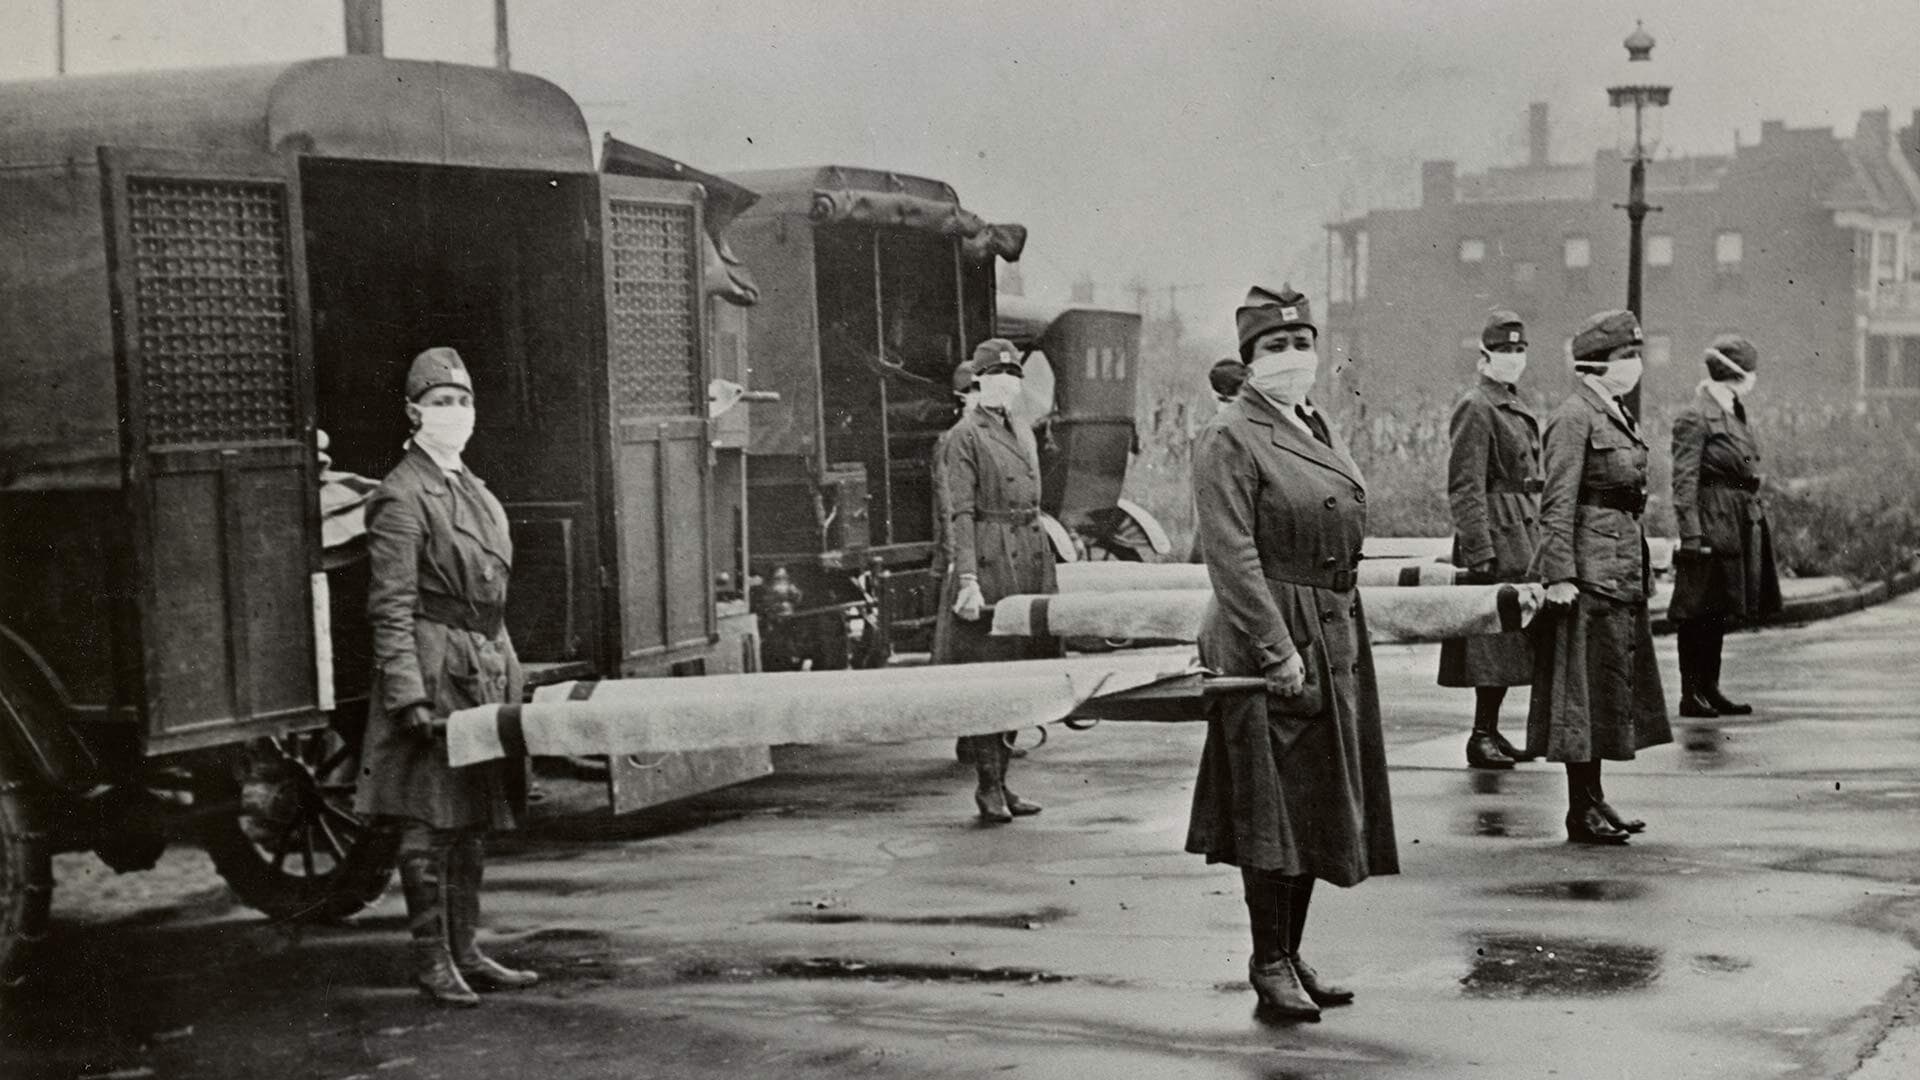 St. Louis Red Cross Motor Corps on duty Oct. 1918 Influenza epidemic